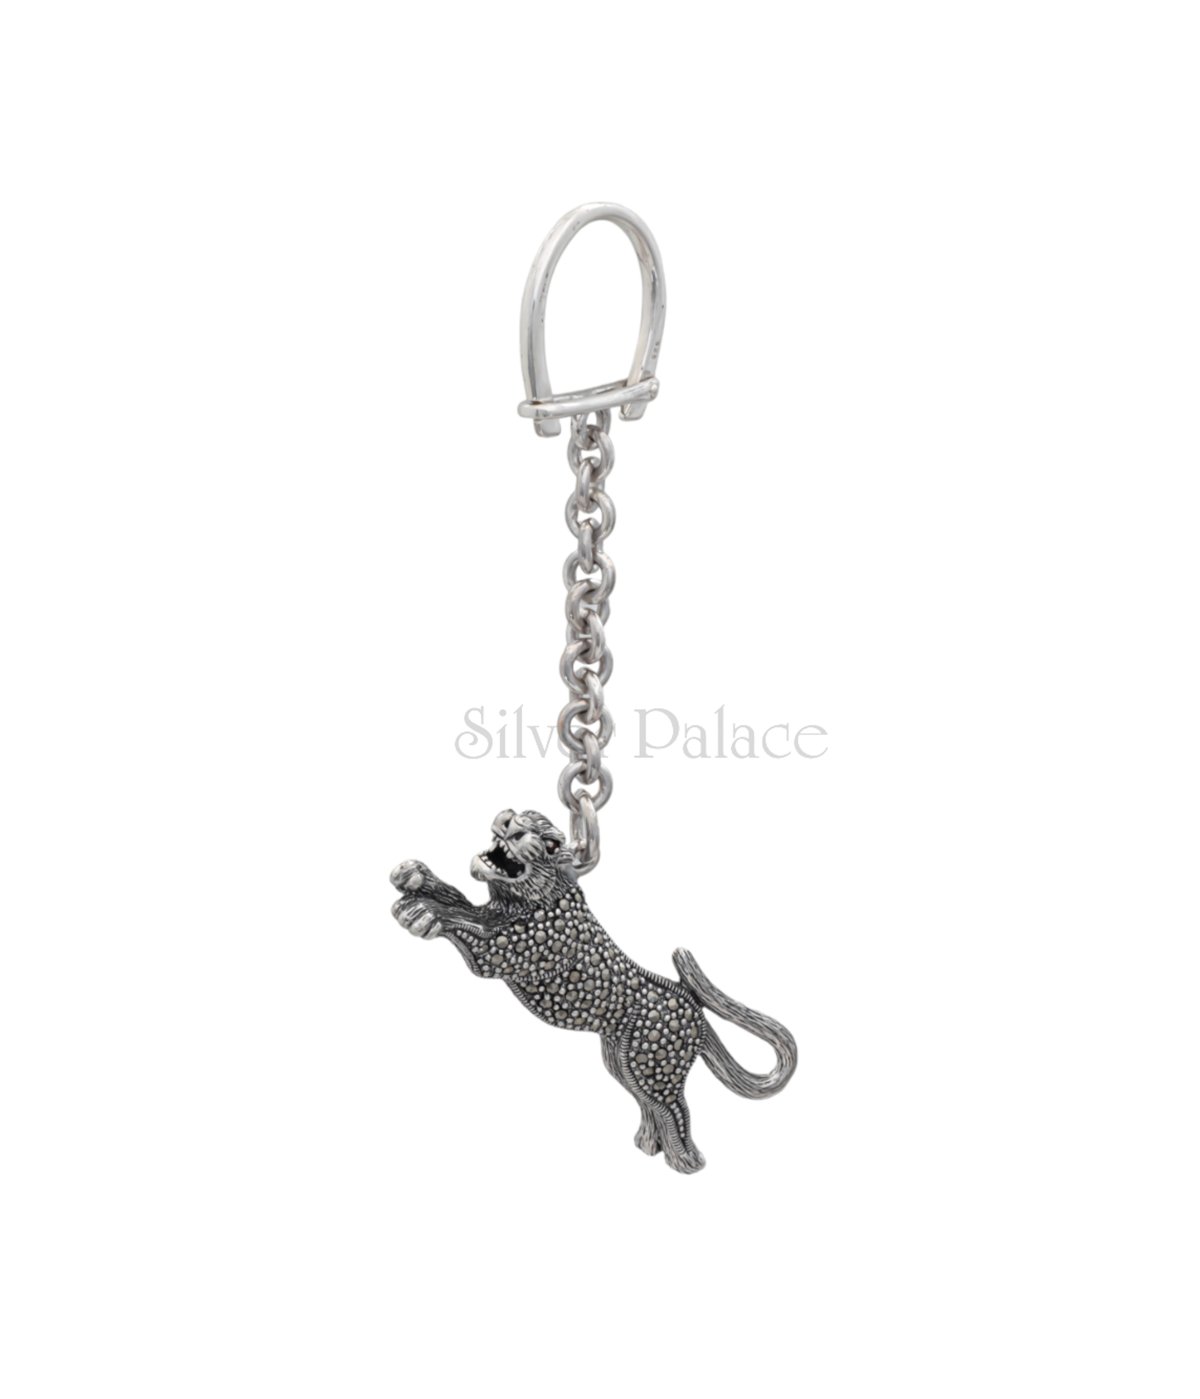 92.5 PURE SILVER CHEETAH  KEYCHAIN FOR MEN